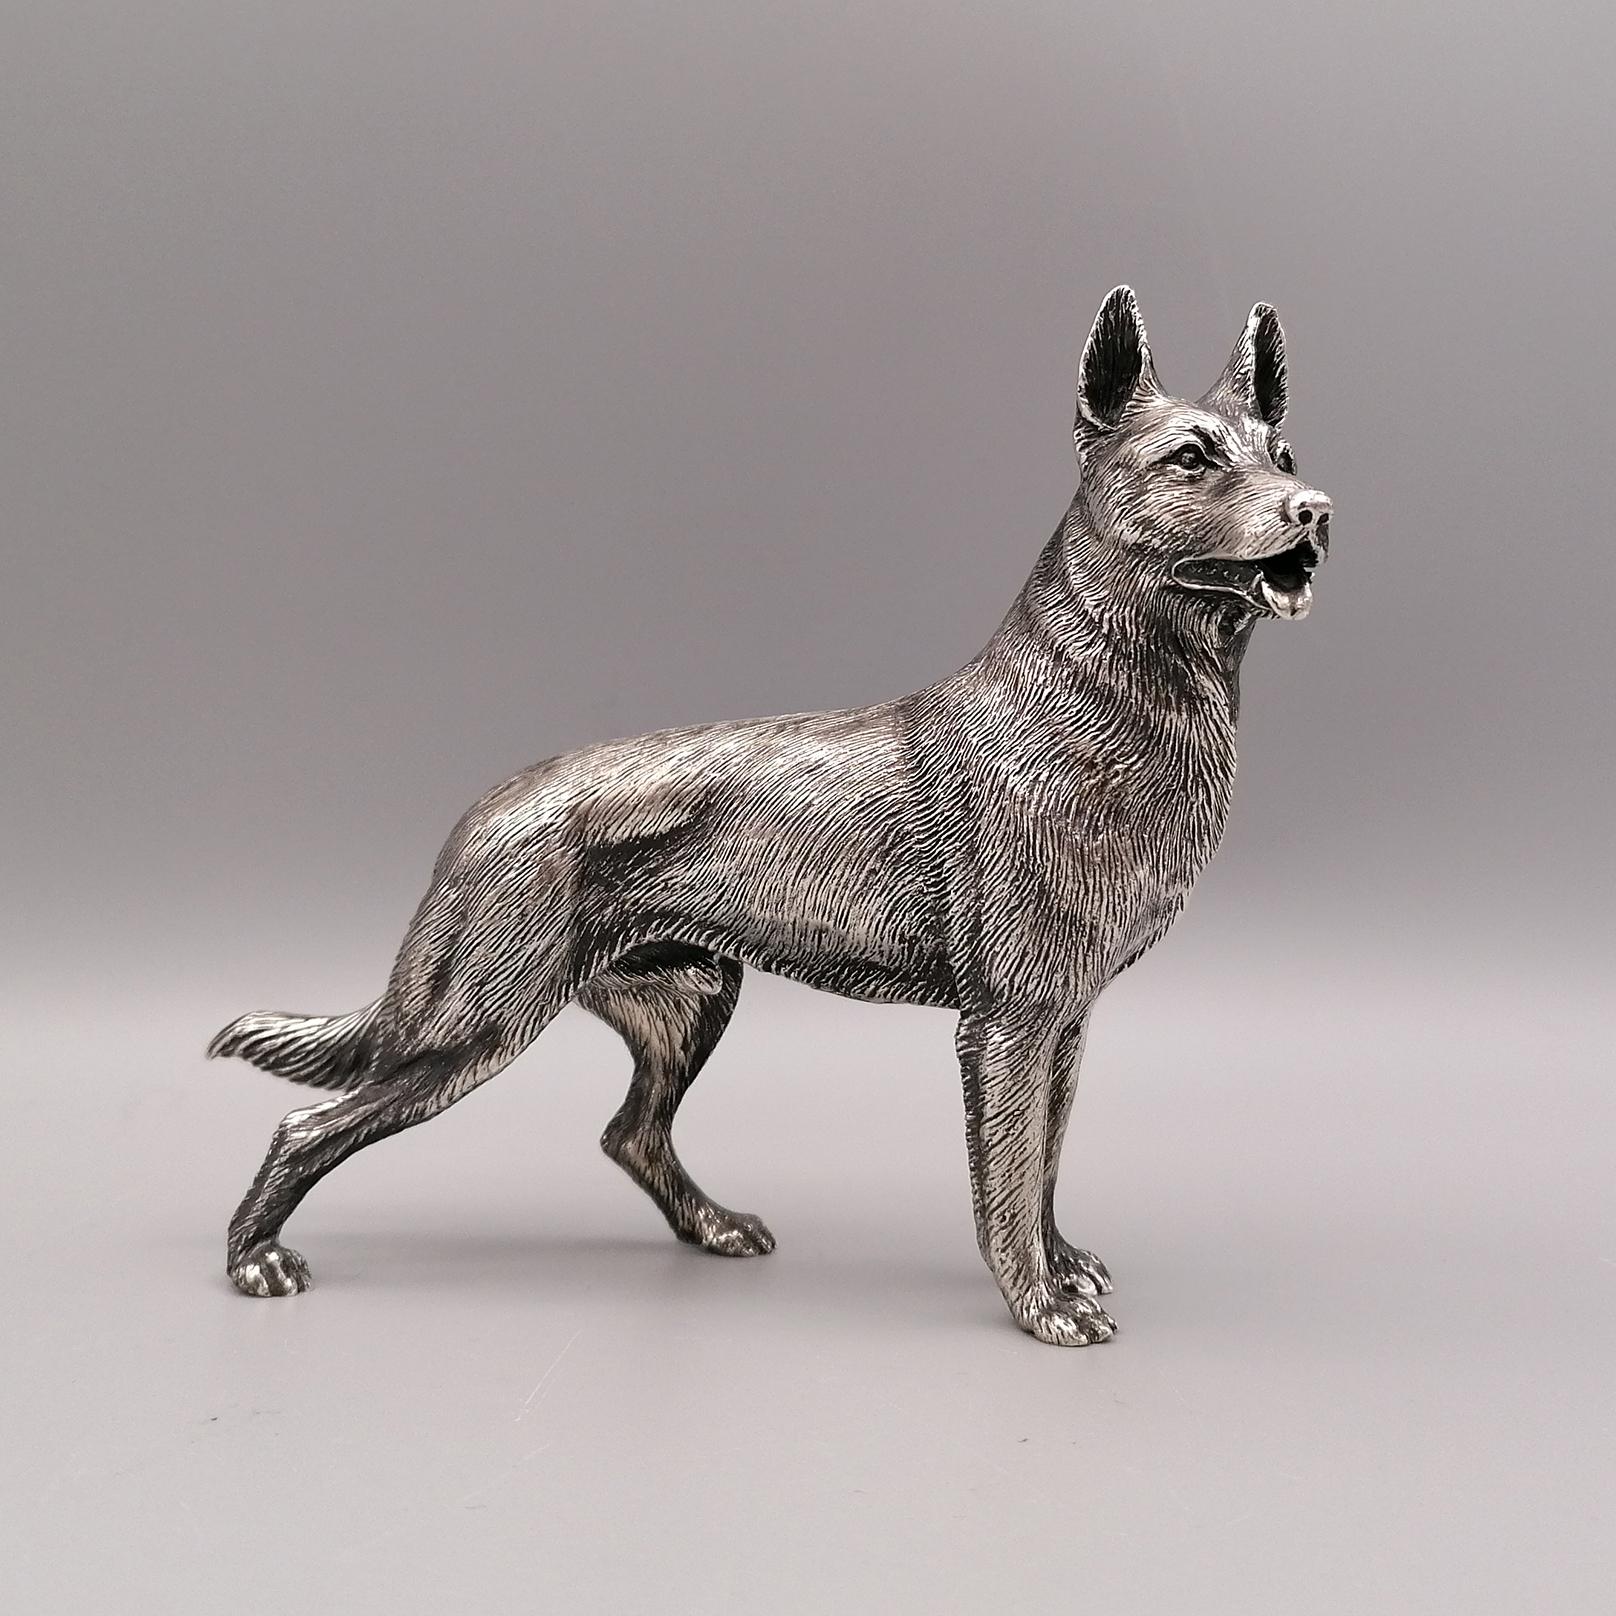 German Shepherd dog sculpture in sterling silver.
The sculpture of the German Shepherd dog was made with the 925 sterling silver casting method and masterfully finished with chisel which makes the details perfect. 

By Argenteria Sorini - Arezzo